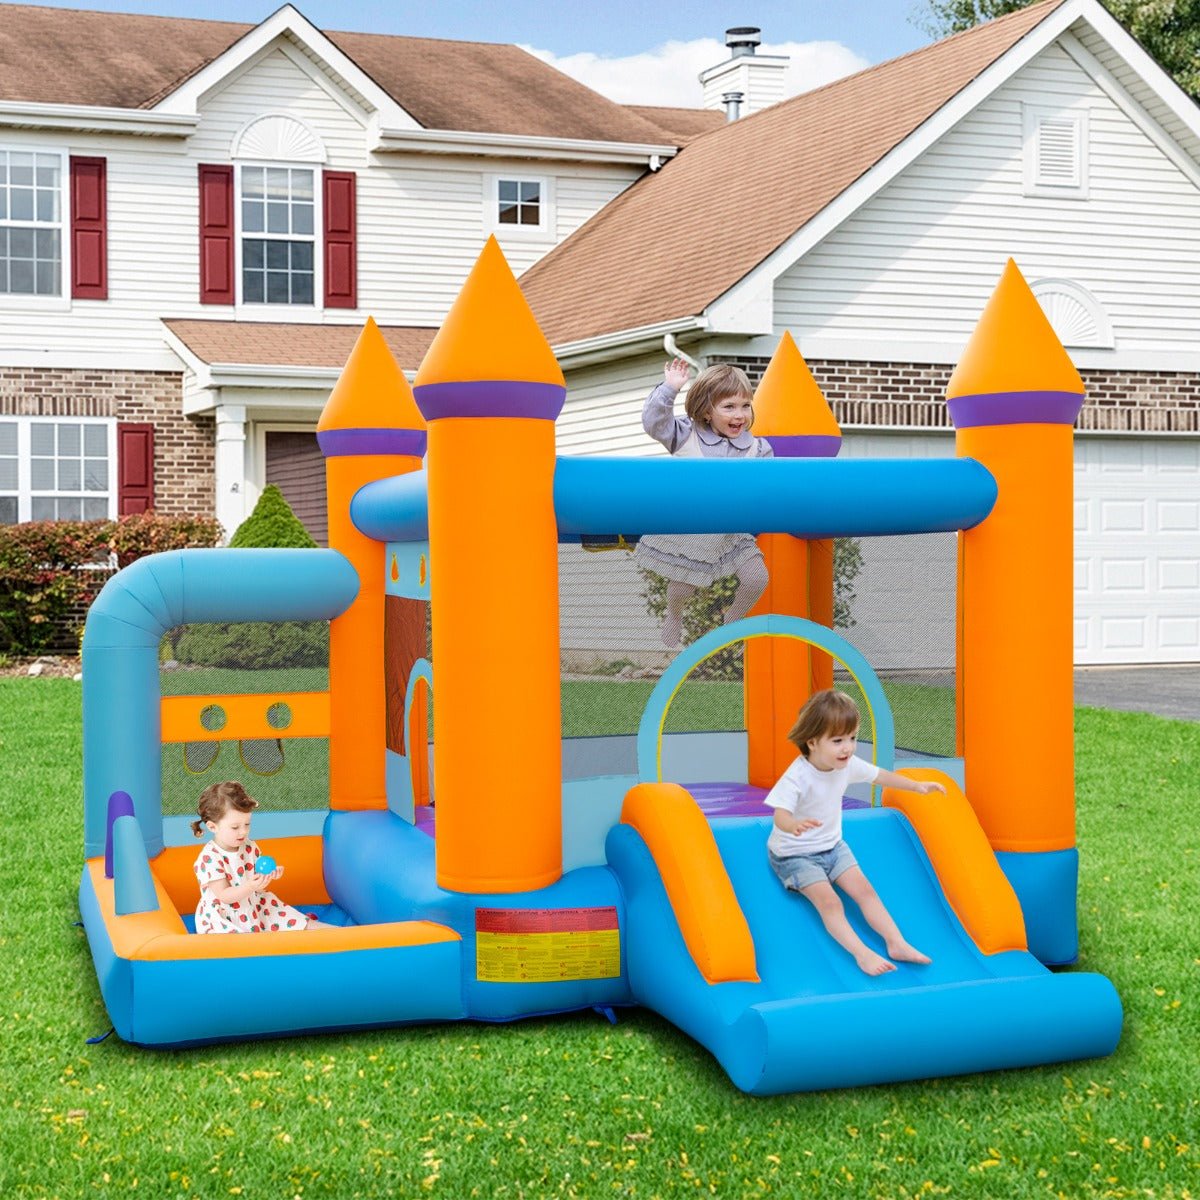 Endless Fun with the 5-in-1 Inflatable Castle - Order Now!